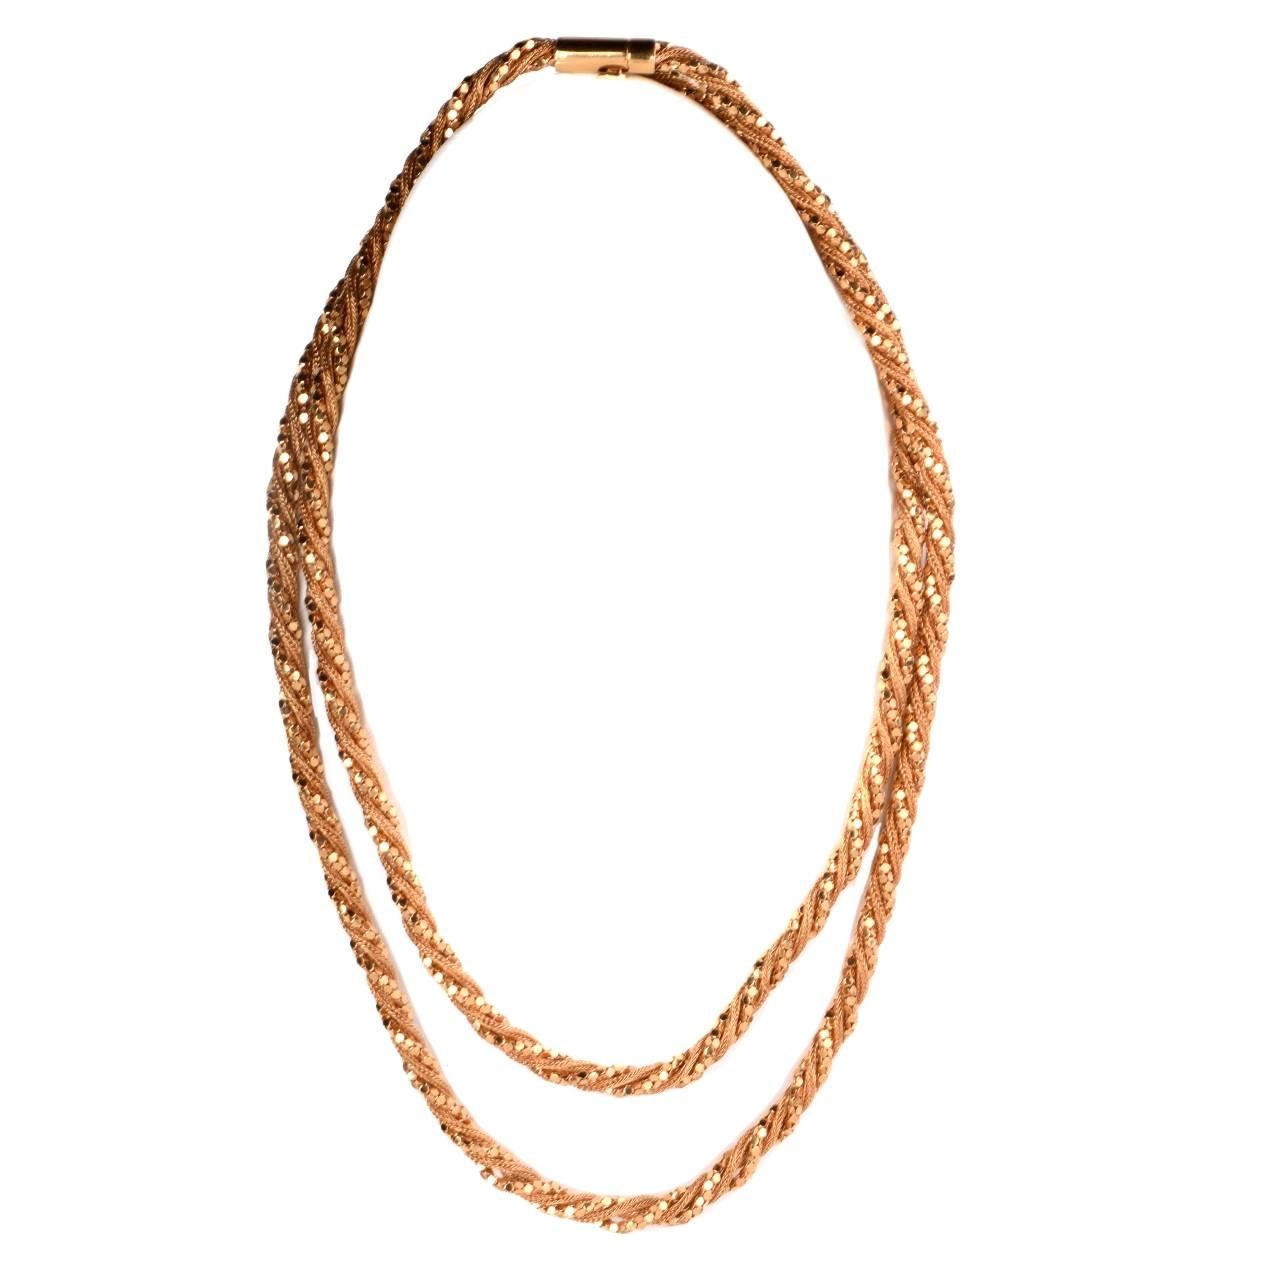 1960s Braided Gold Chain Necklace